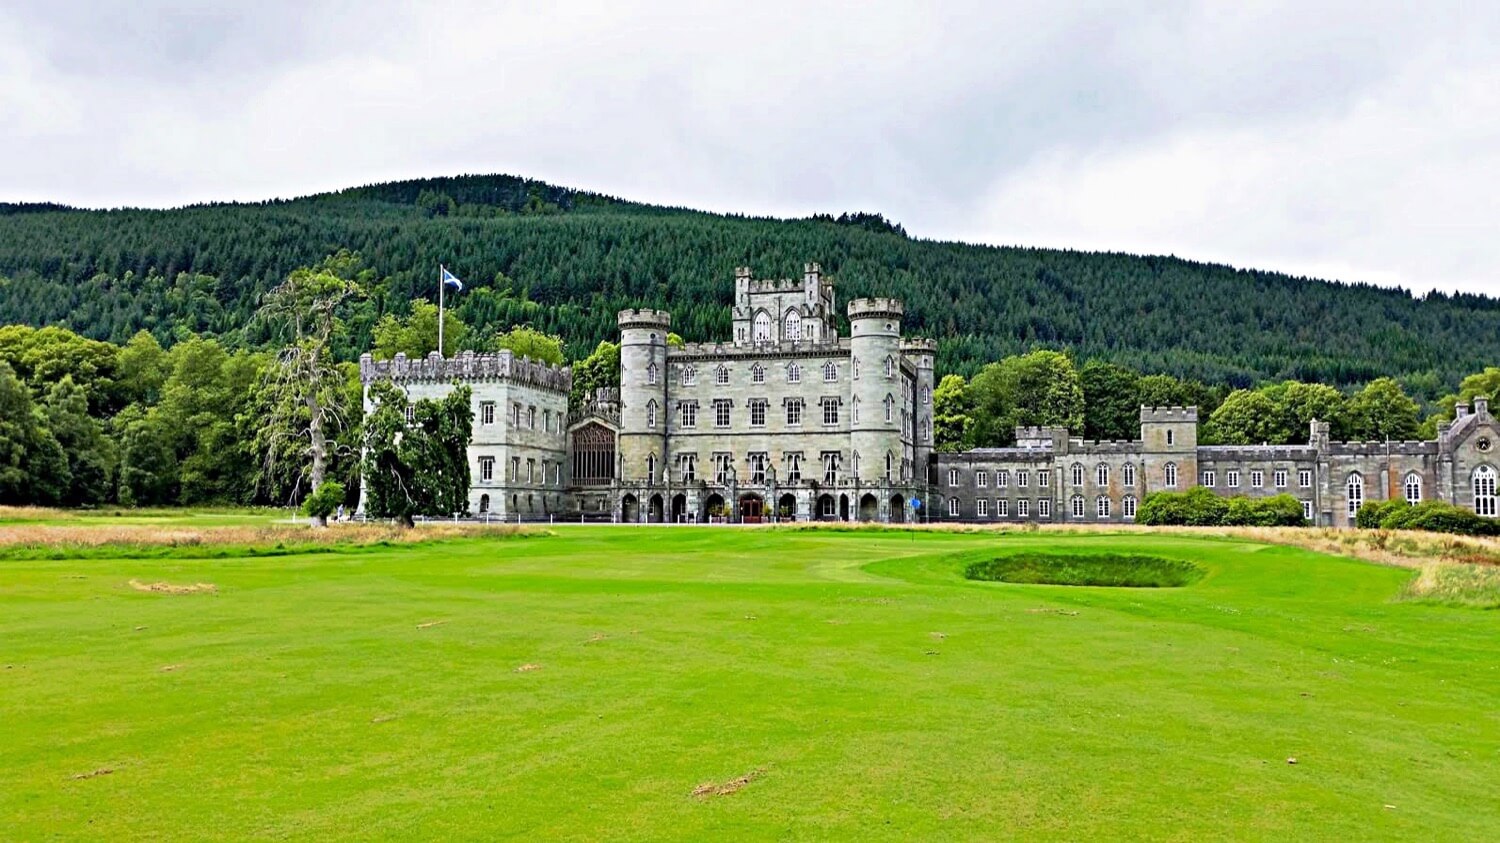 Taymouth Castle